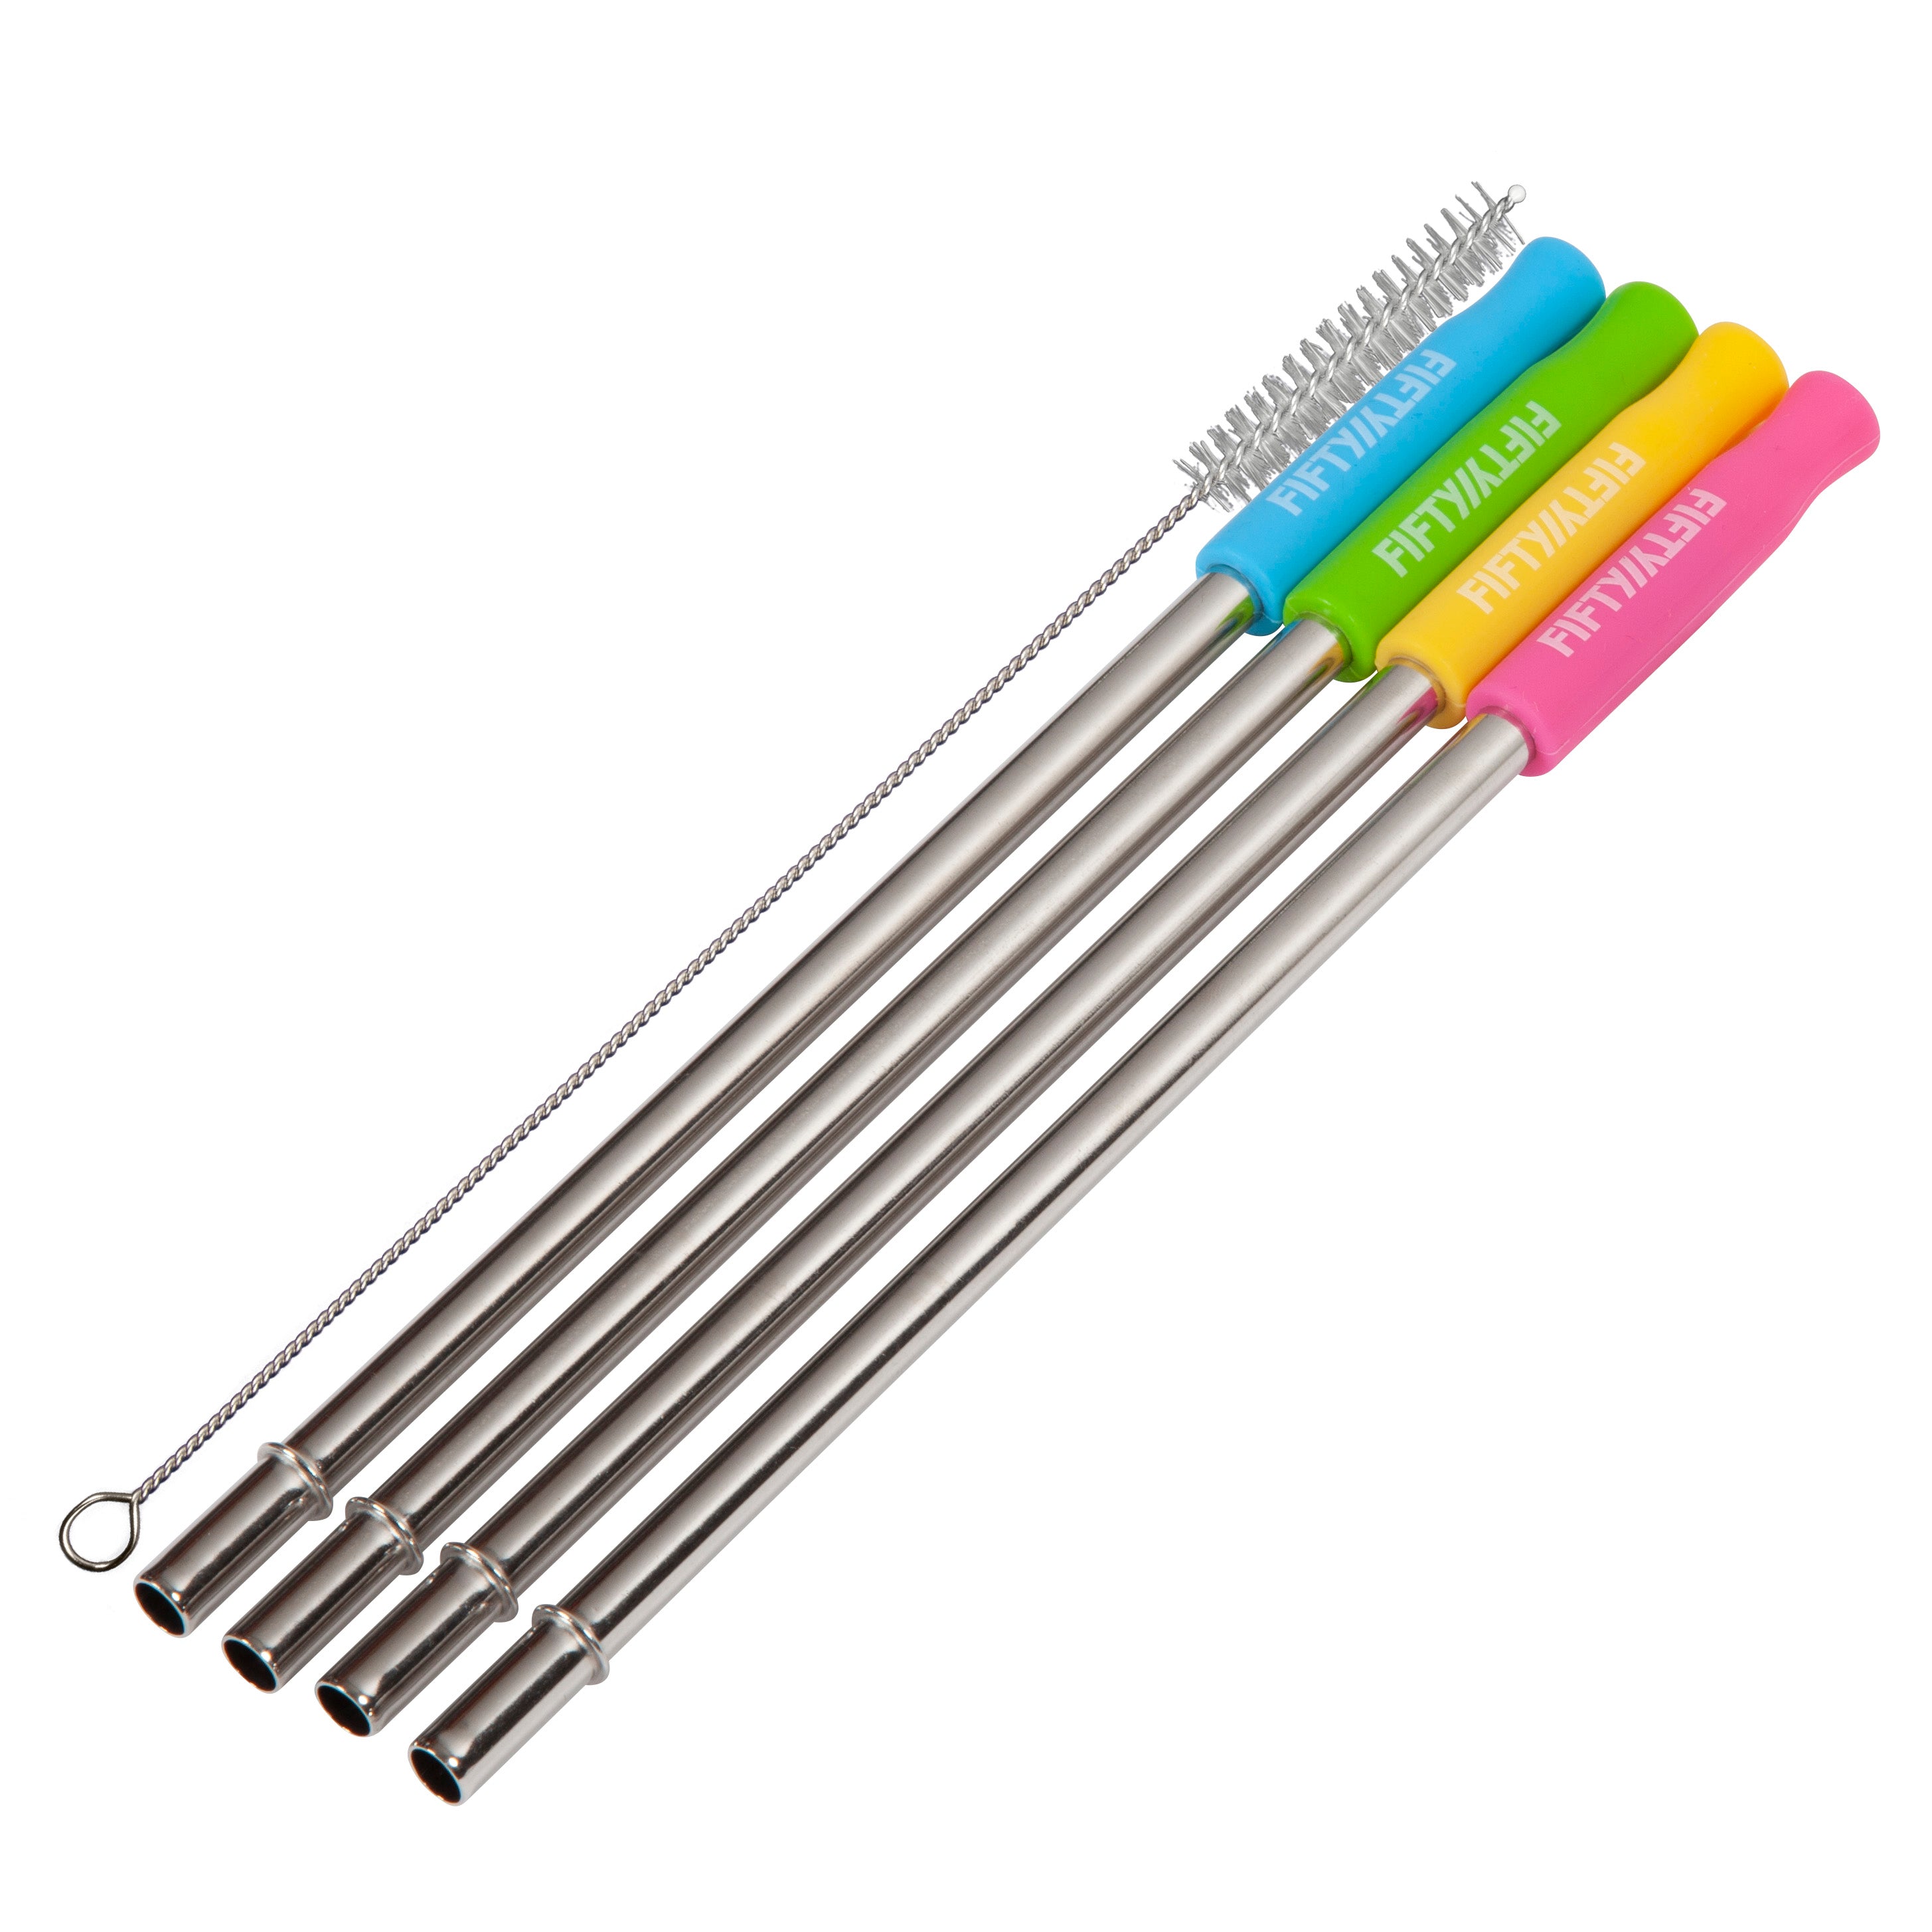 Metal Straws with case, Reusable Stainless Steel Straws with Brush